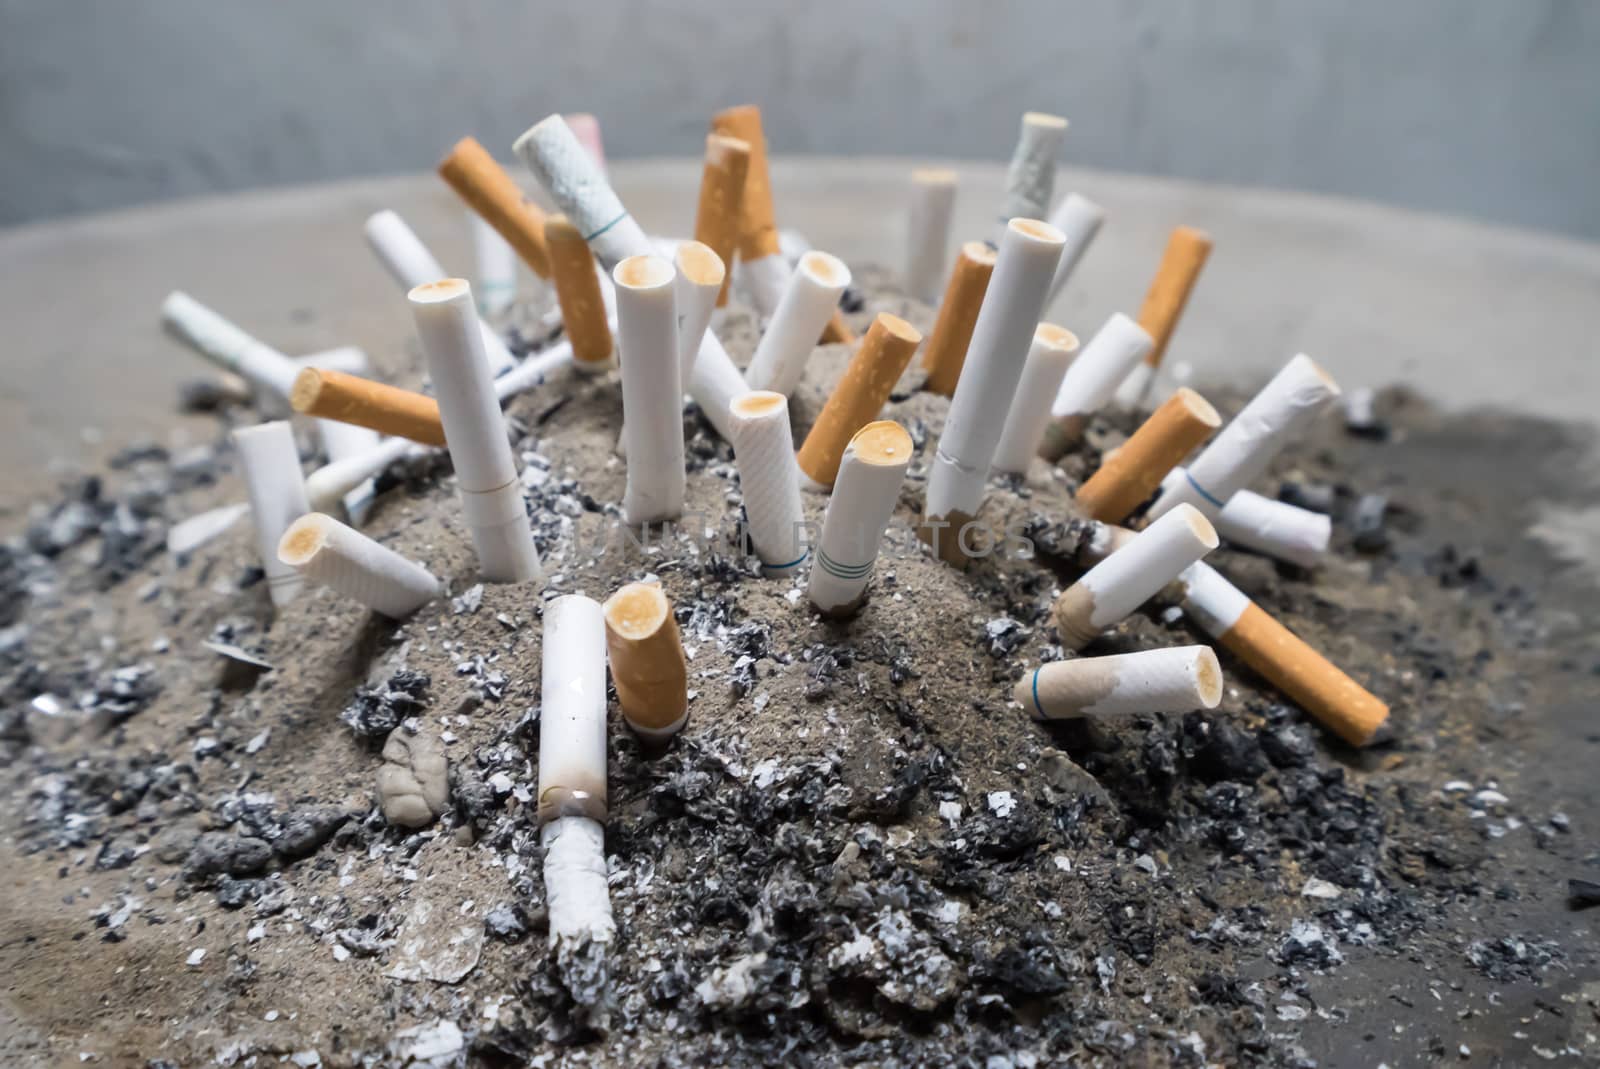 Smoked Cigarettes Butts in sand ashtray bin.Selective focus